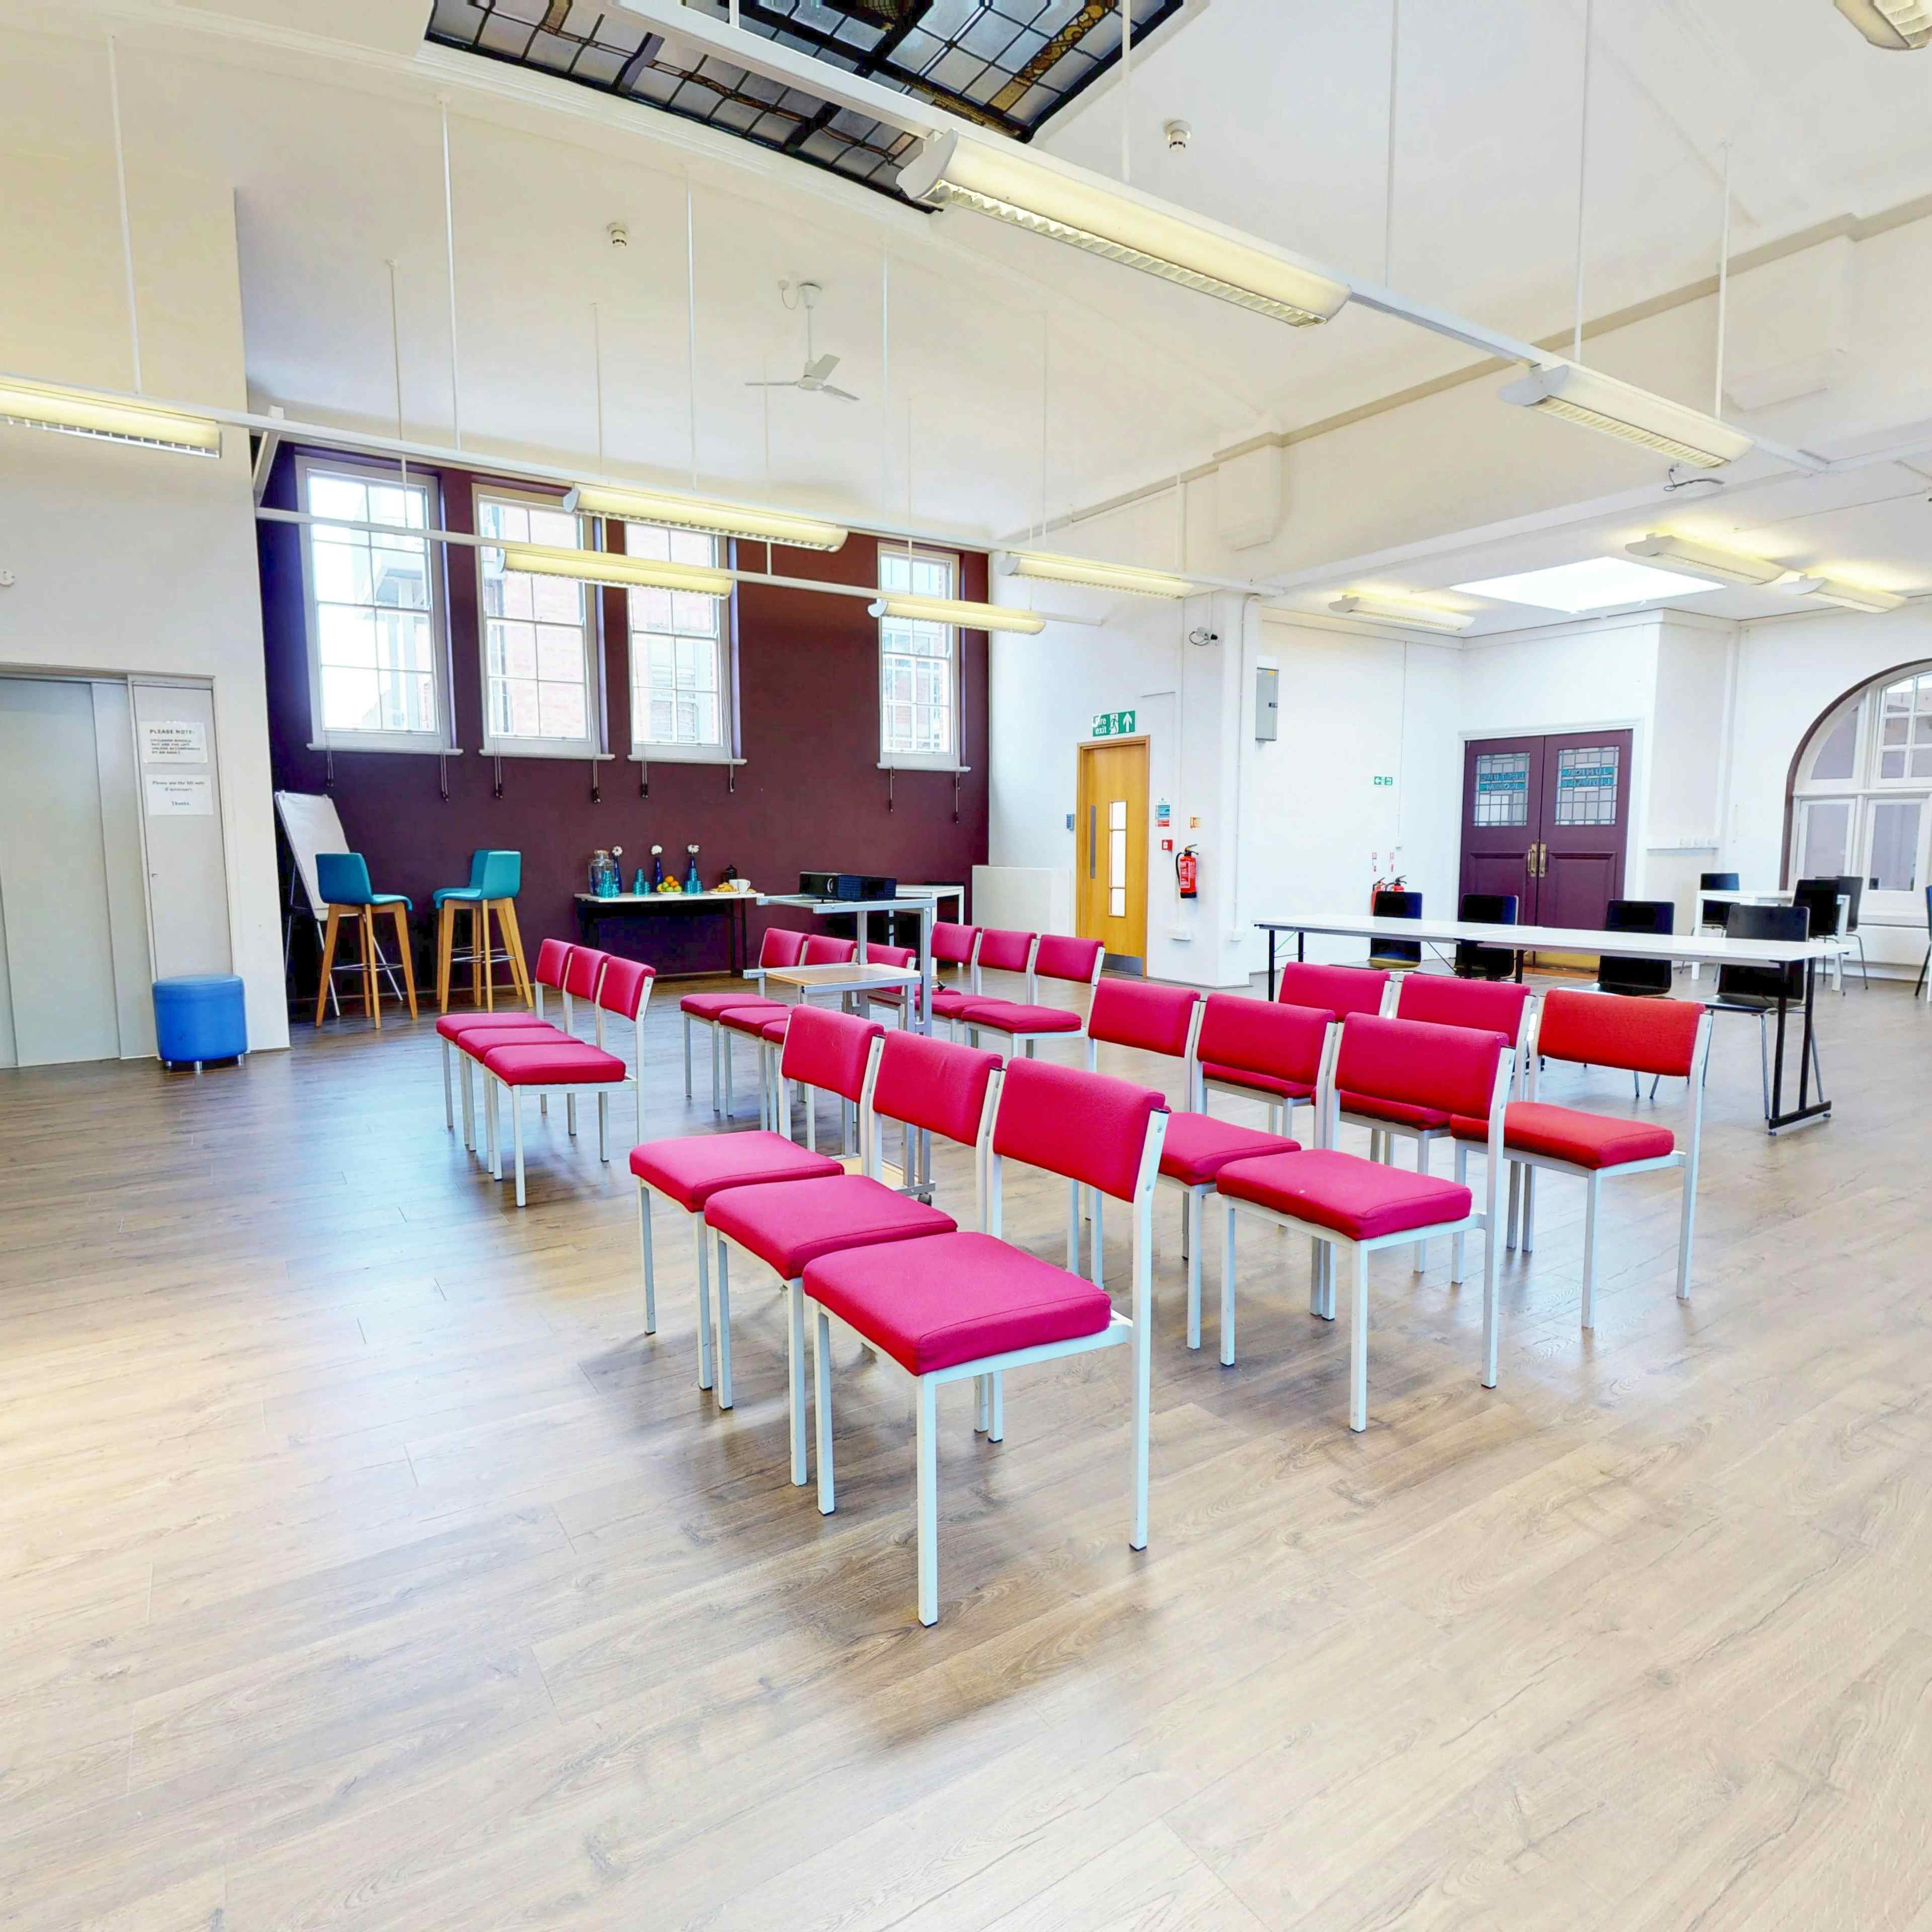 The Upper Norwood Library Hub - The Burgundy Room image 2